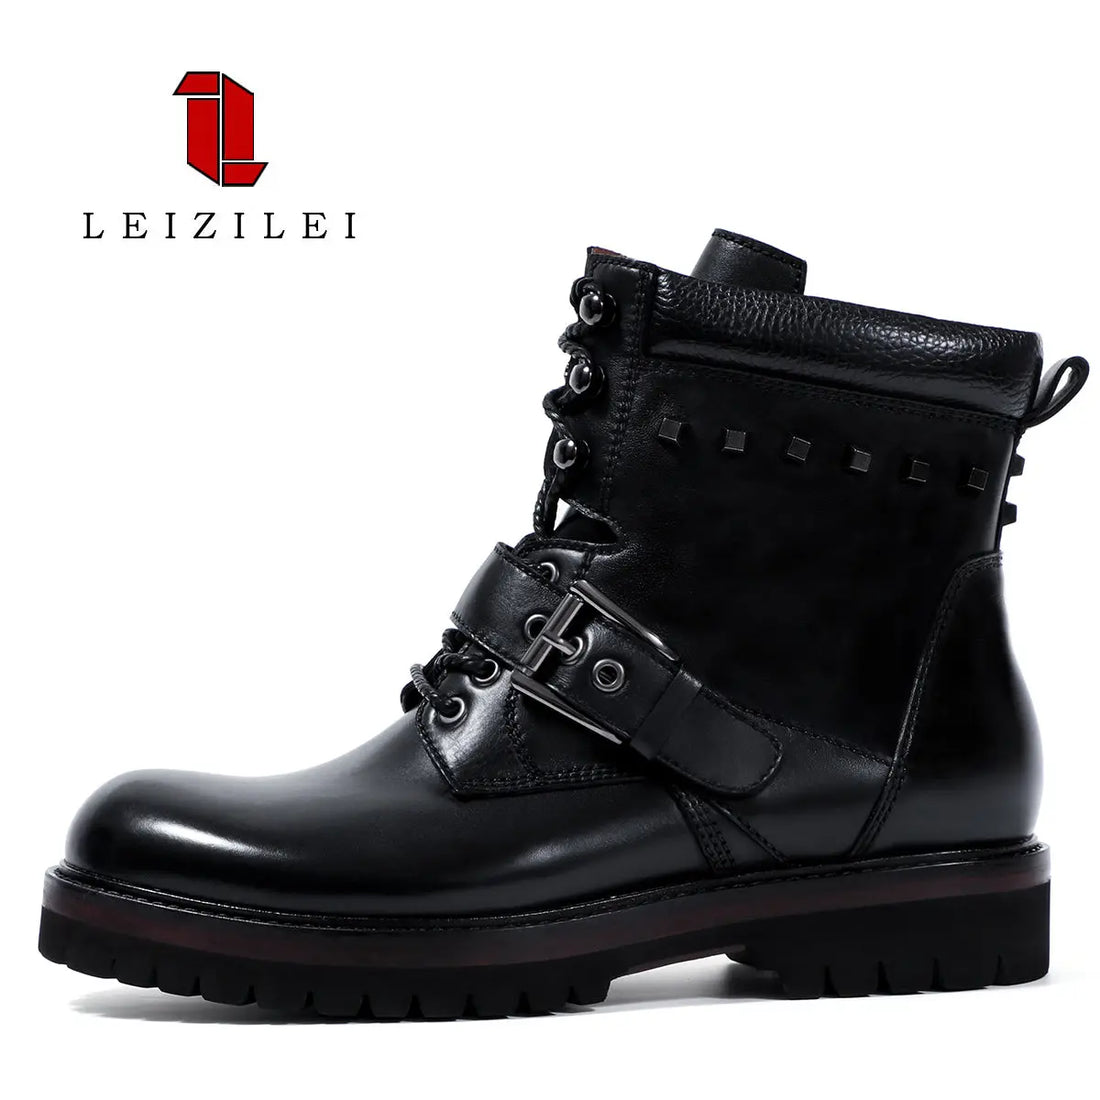 Men's punk leather boots genuine leather lace-up Martin boots 528H02 LEIZILEI